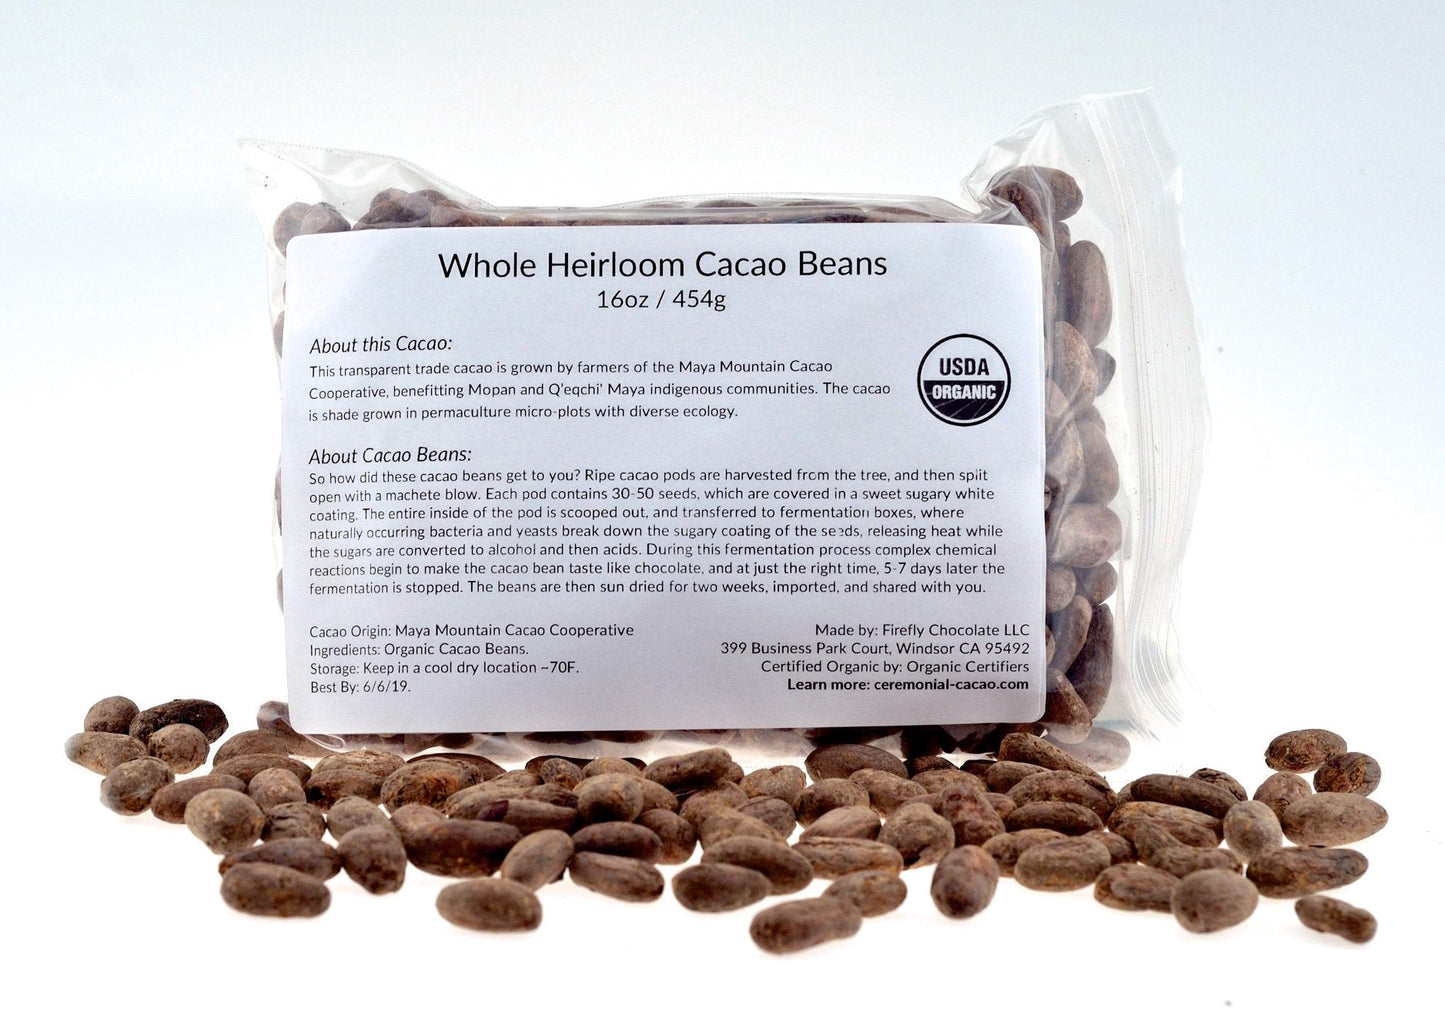 Cacao Beans (Whole) for Cacao Ceremony and Holistic Health by FireflyChocolate